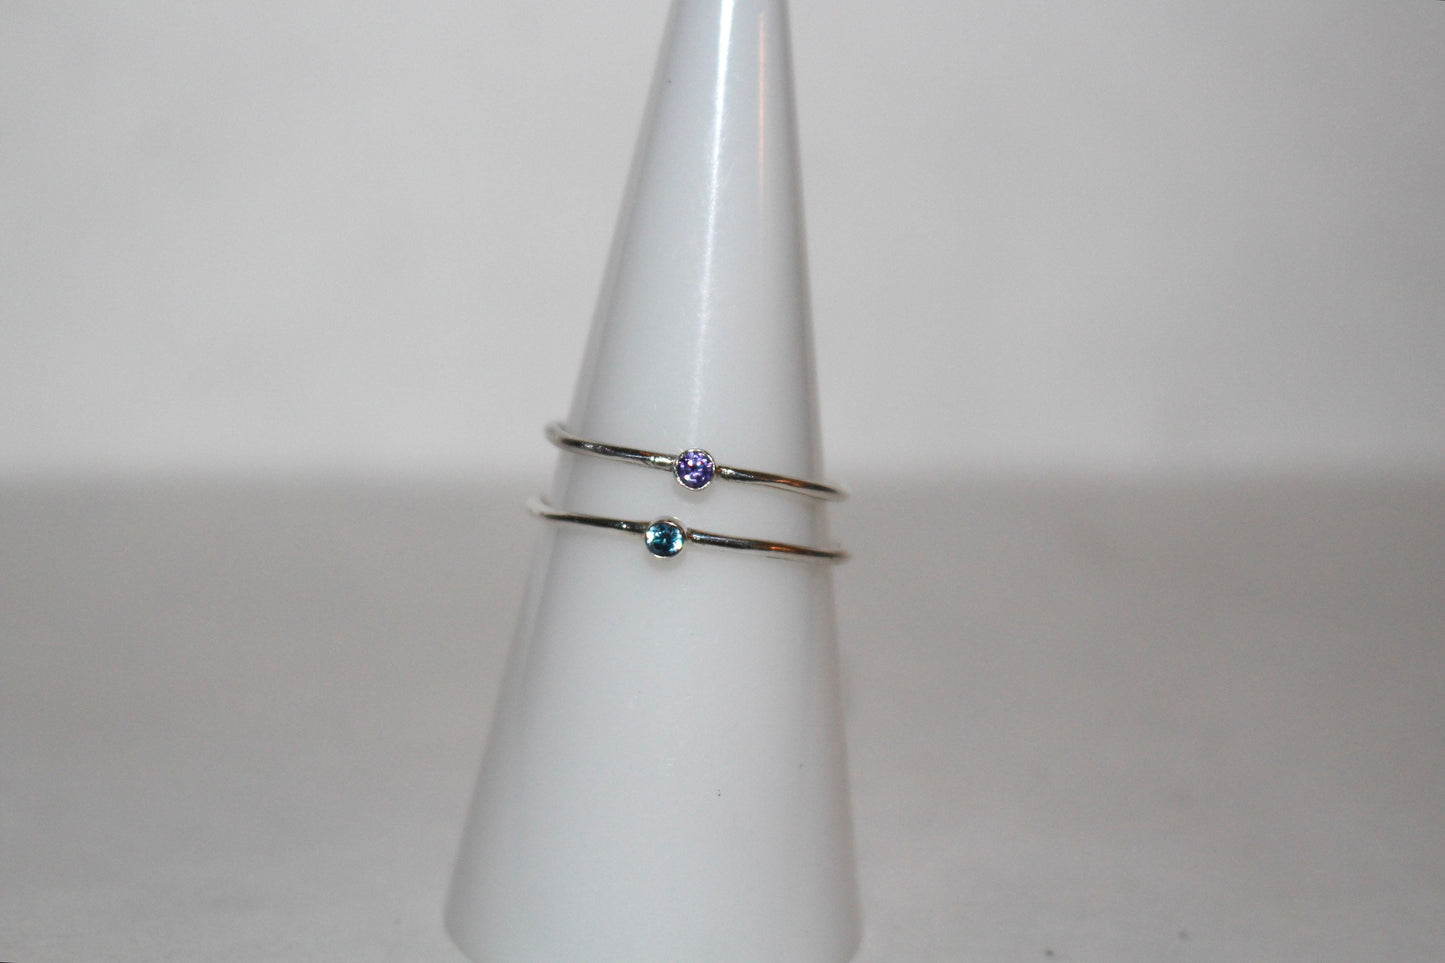 Birthstone Ring, Cubic Zirconia and Sterling Silver, Minimalist Jewelry